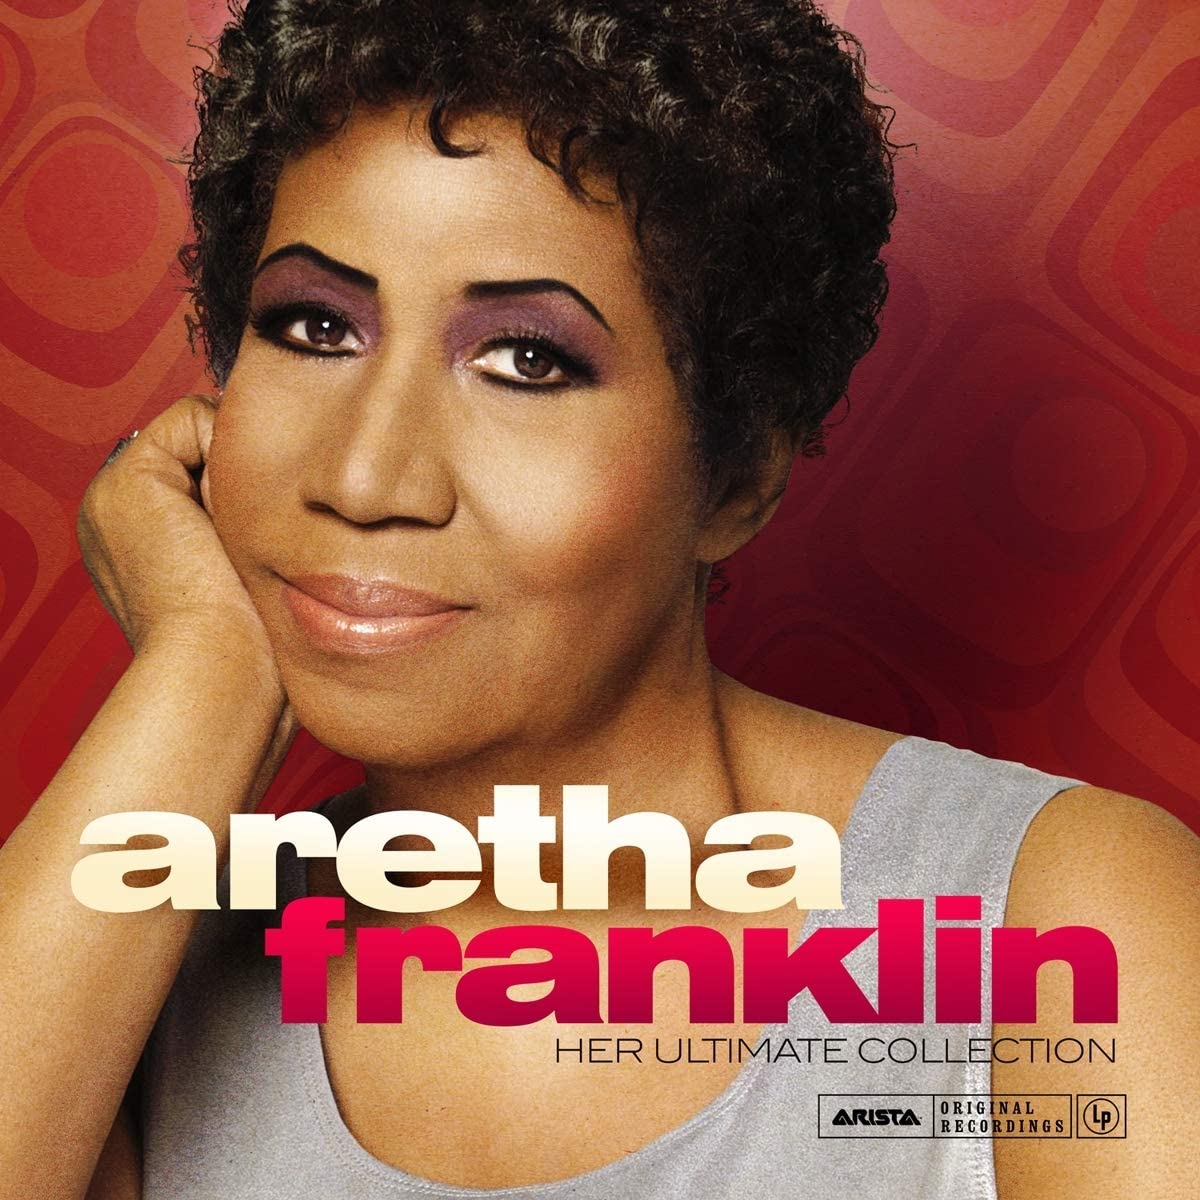 A collection of Greatest Hits on Vinyl from Aretha Franklin.